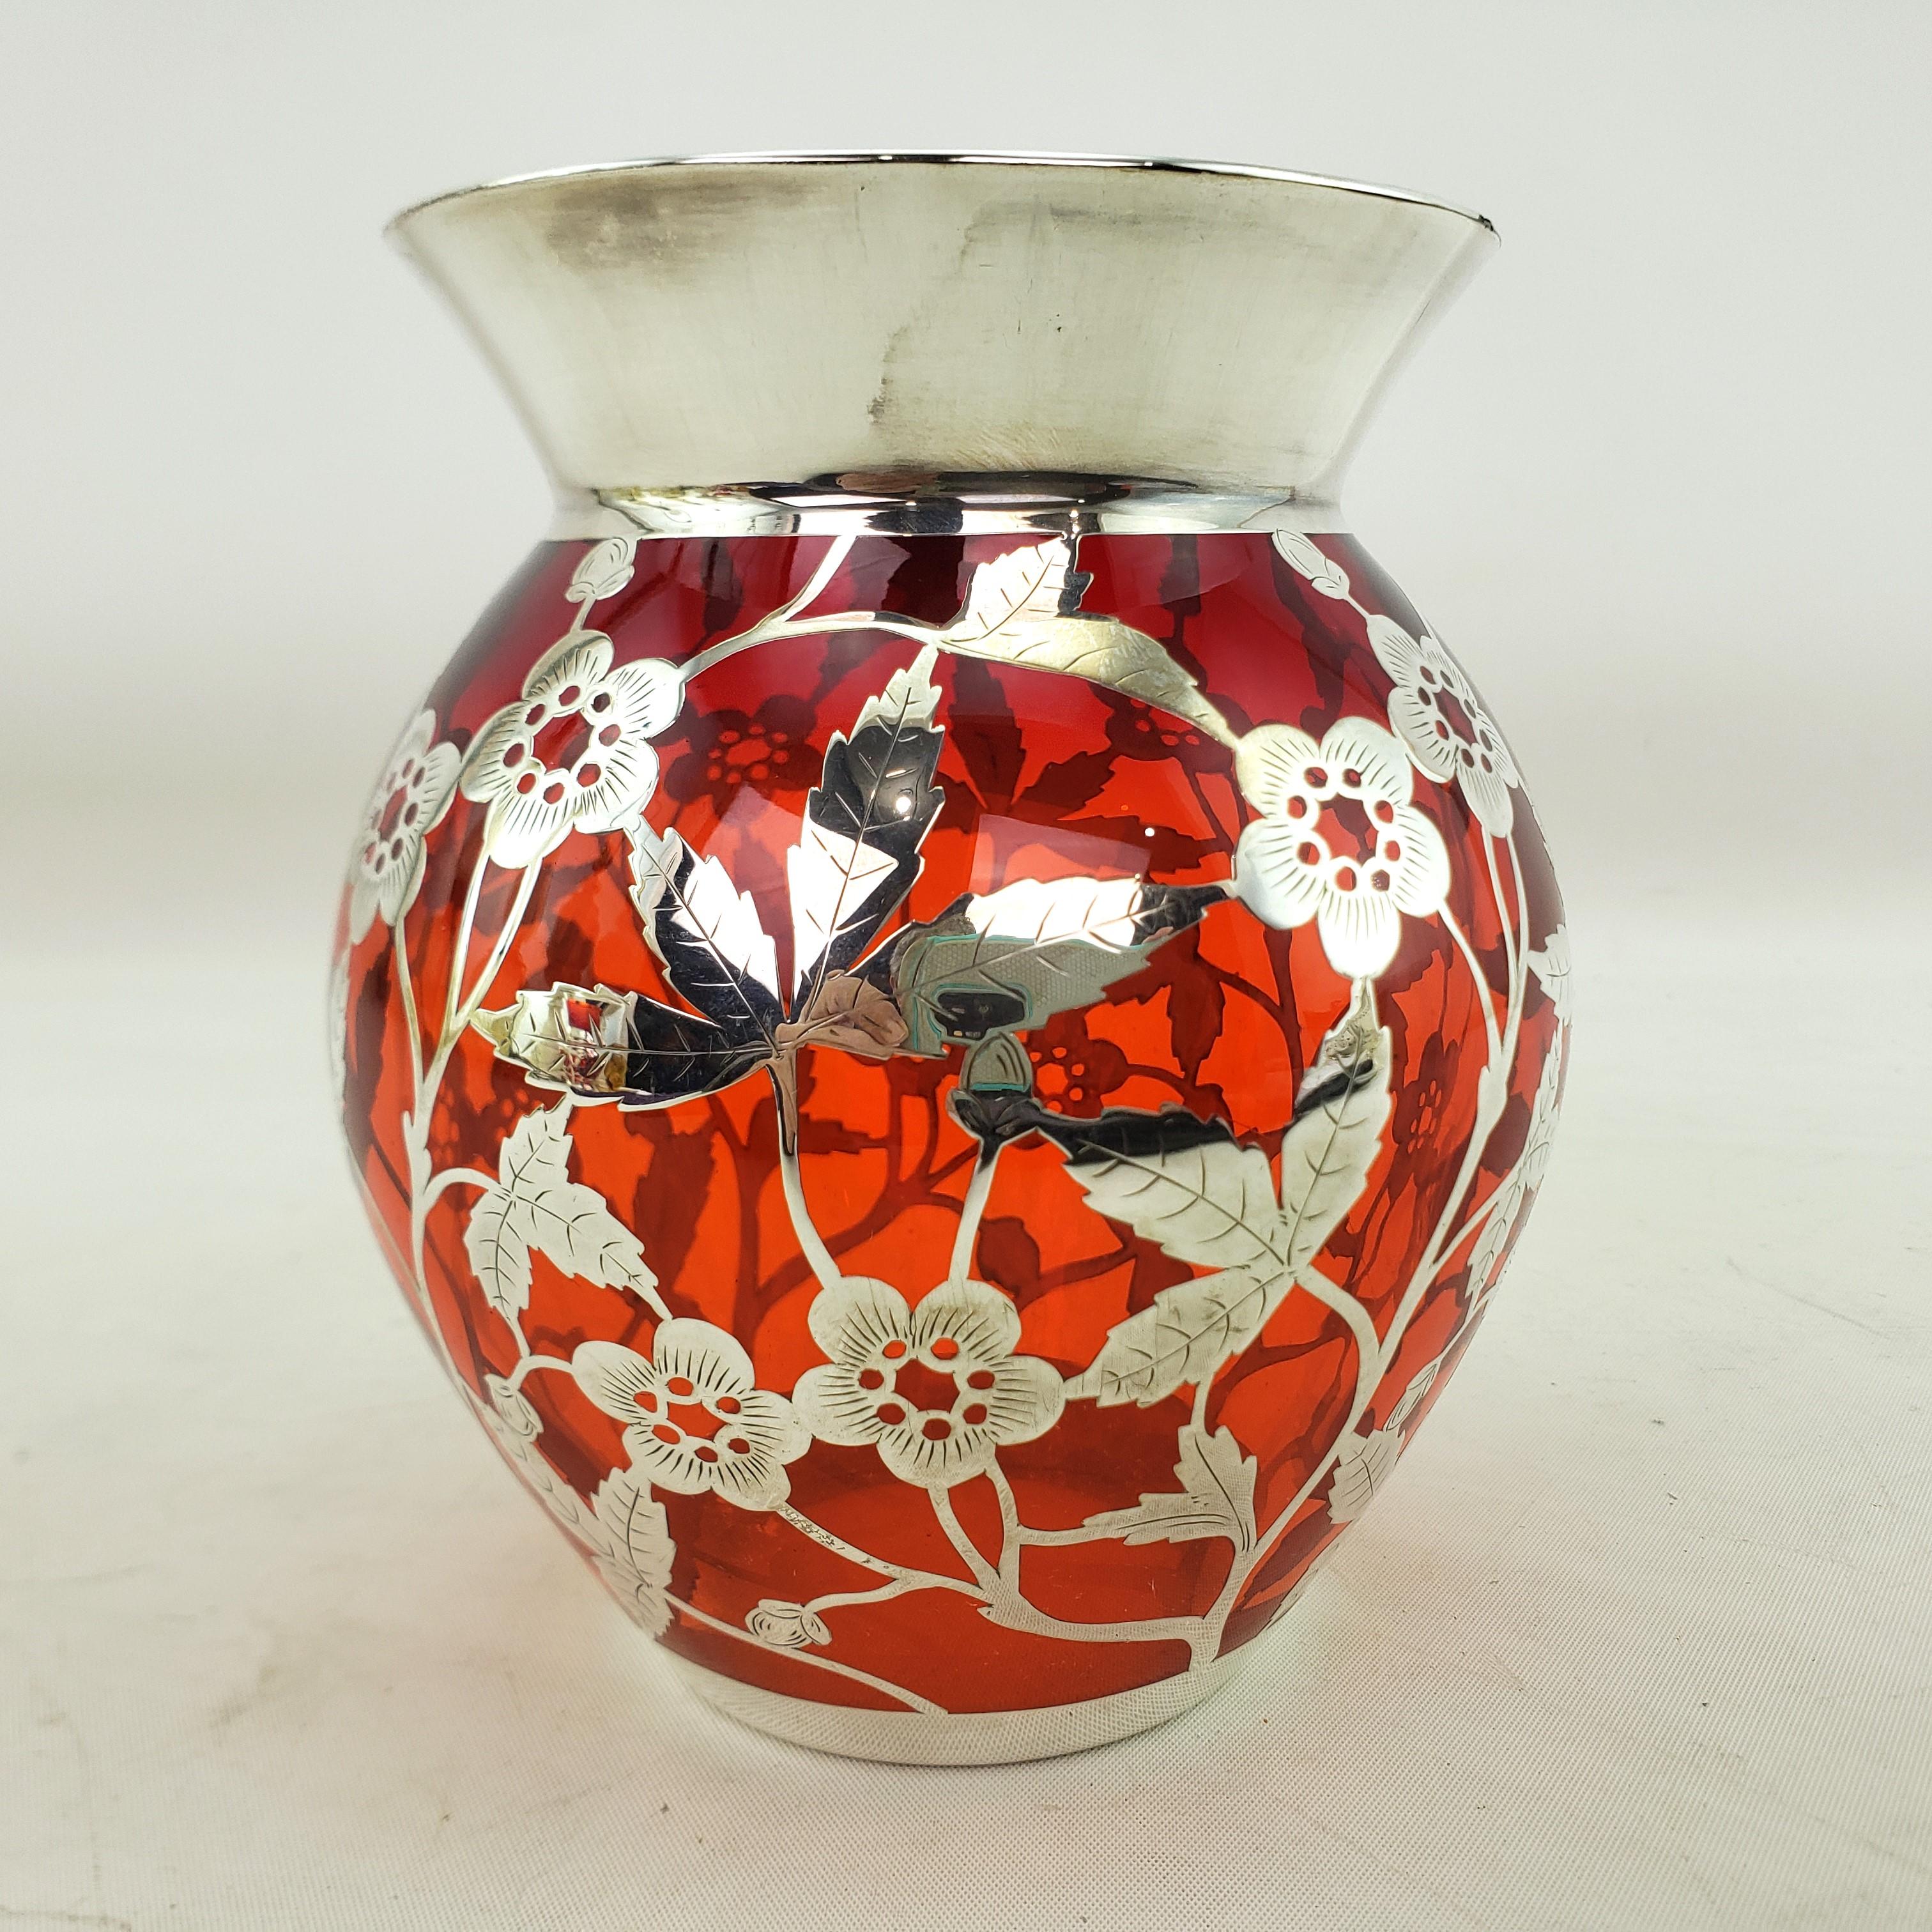 Antique Silver Overlay Ruby Glass Vase with Pierced & Engraved Floral Motif In Good Condition For Sale In Hamilton, Ontario